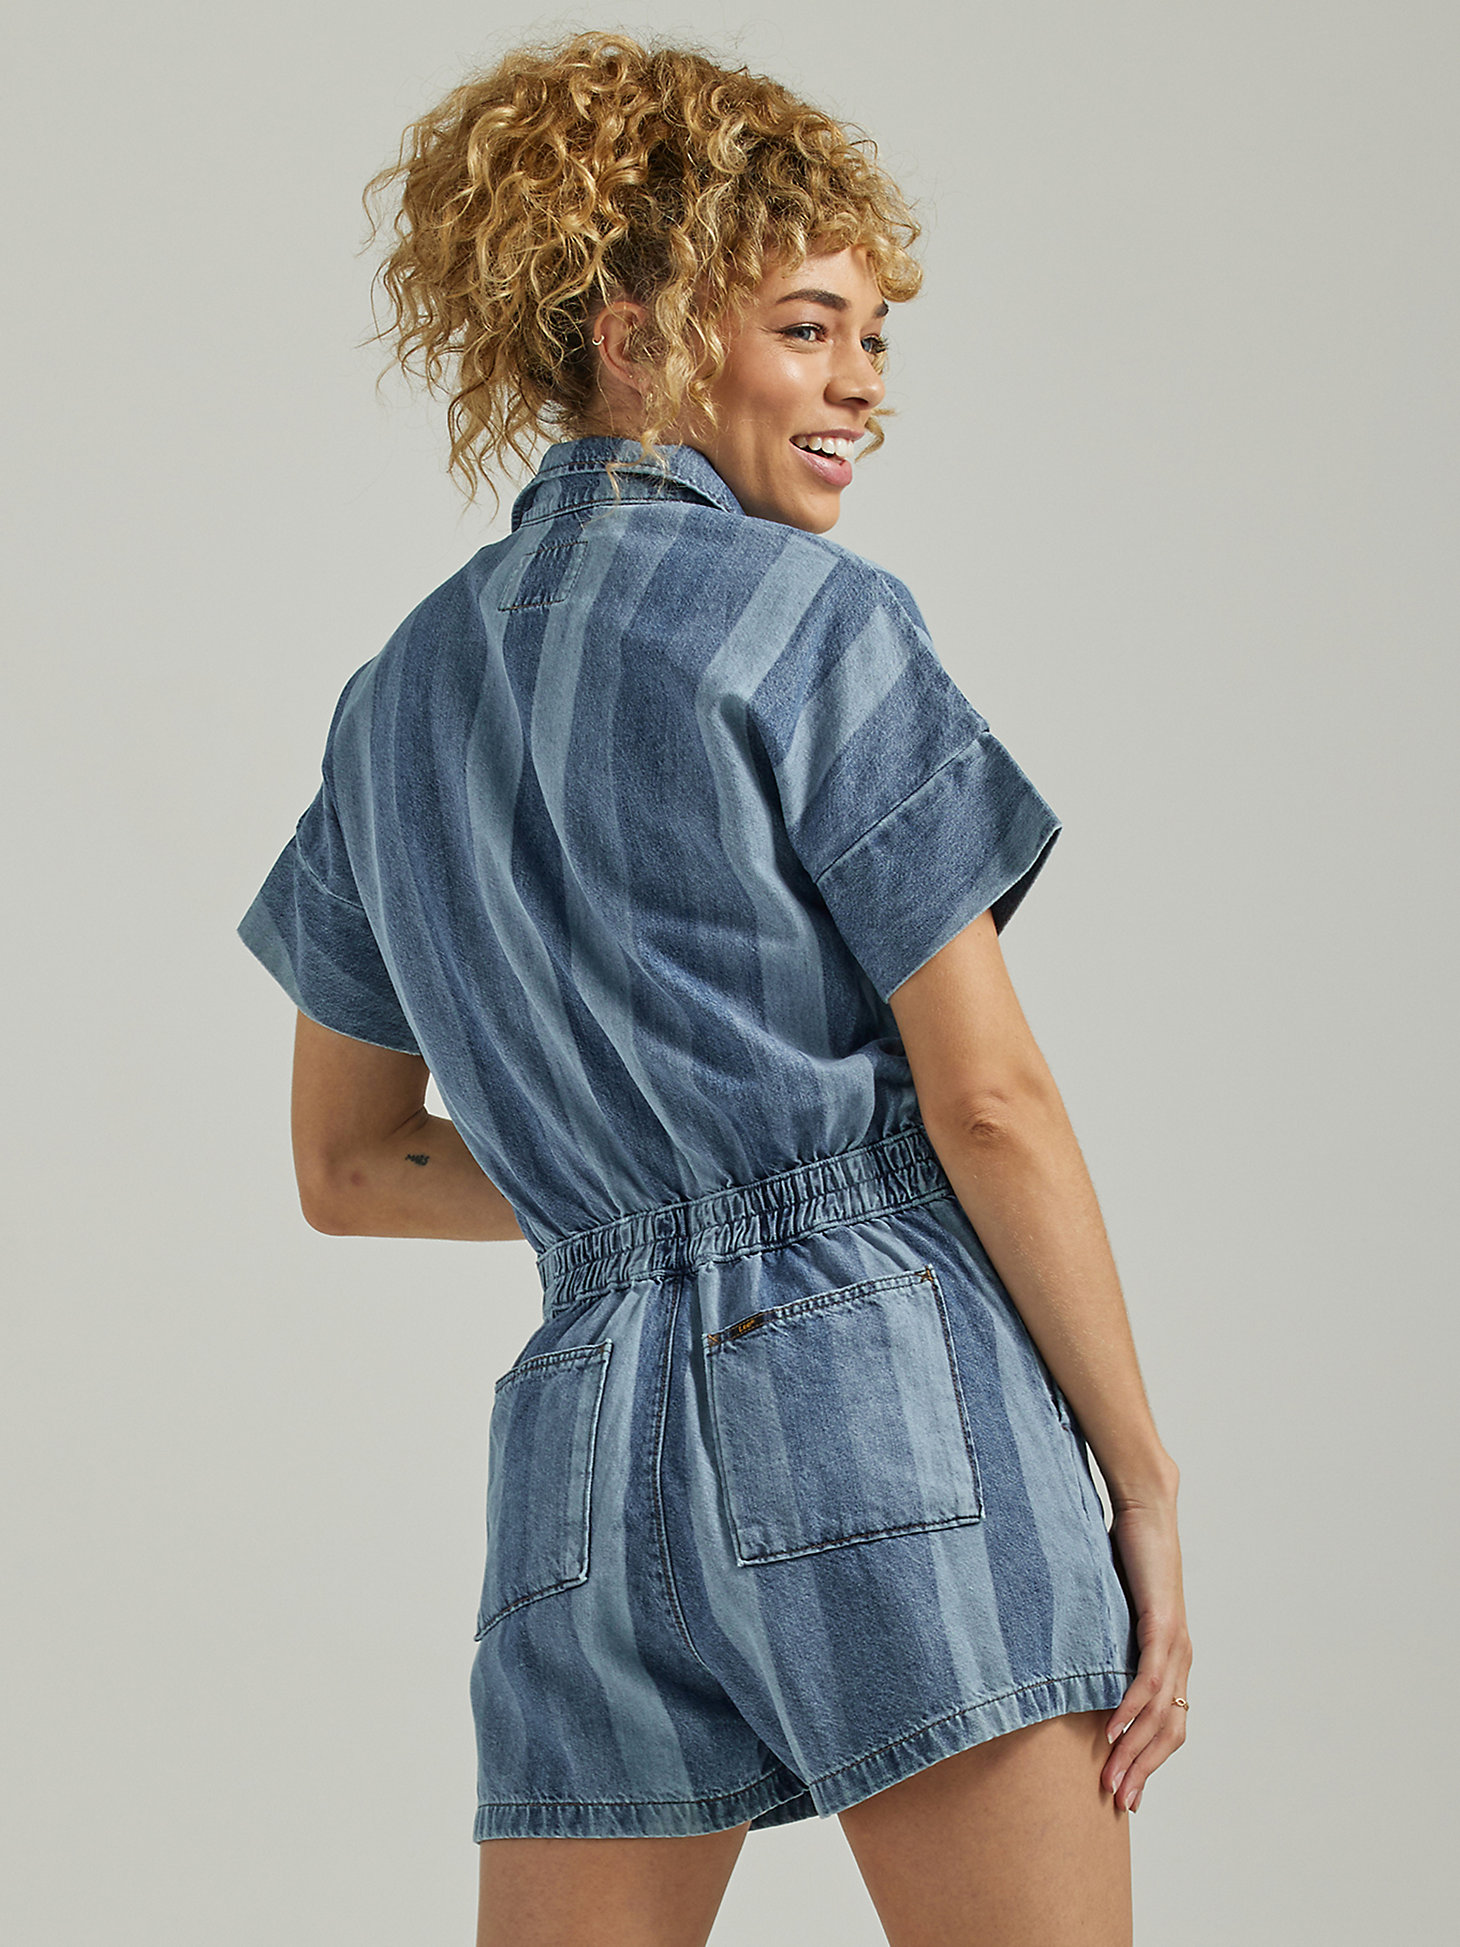 Women's Short Union-Alls® in Hits of Blue alternative view 1